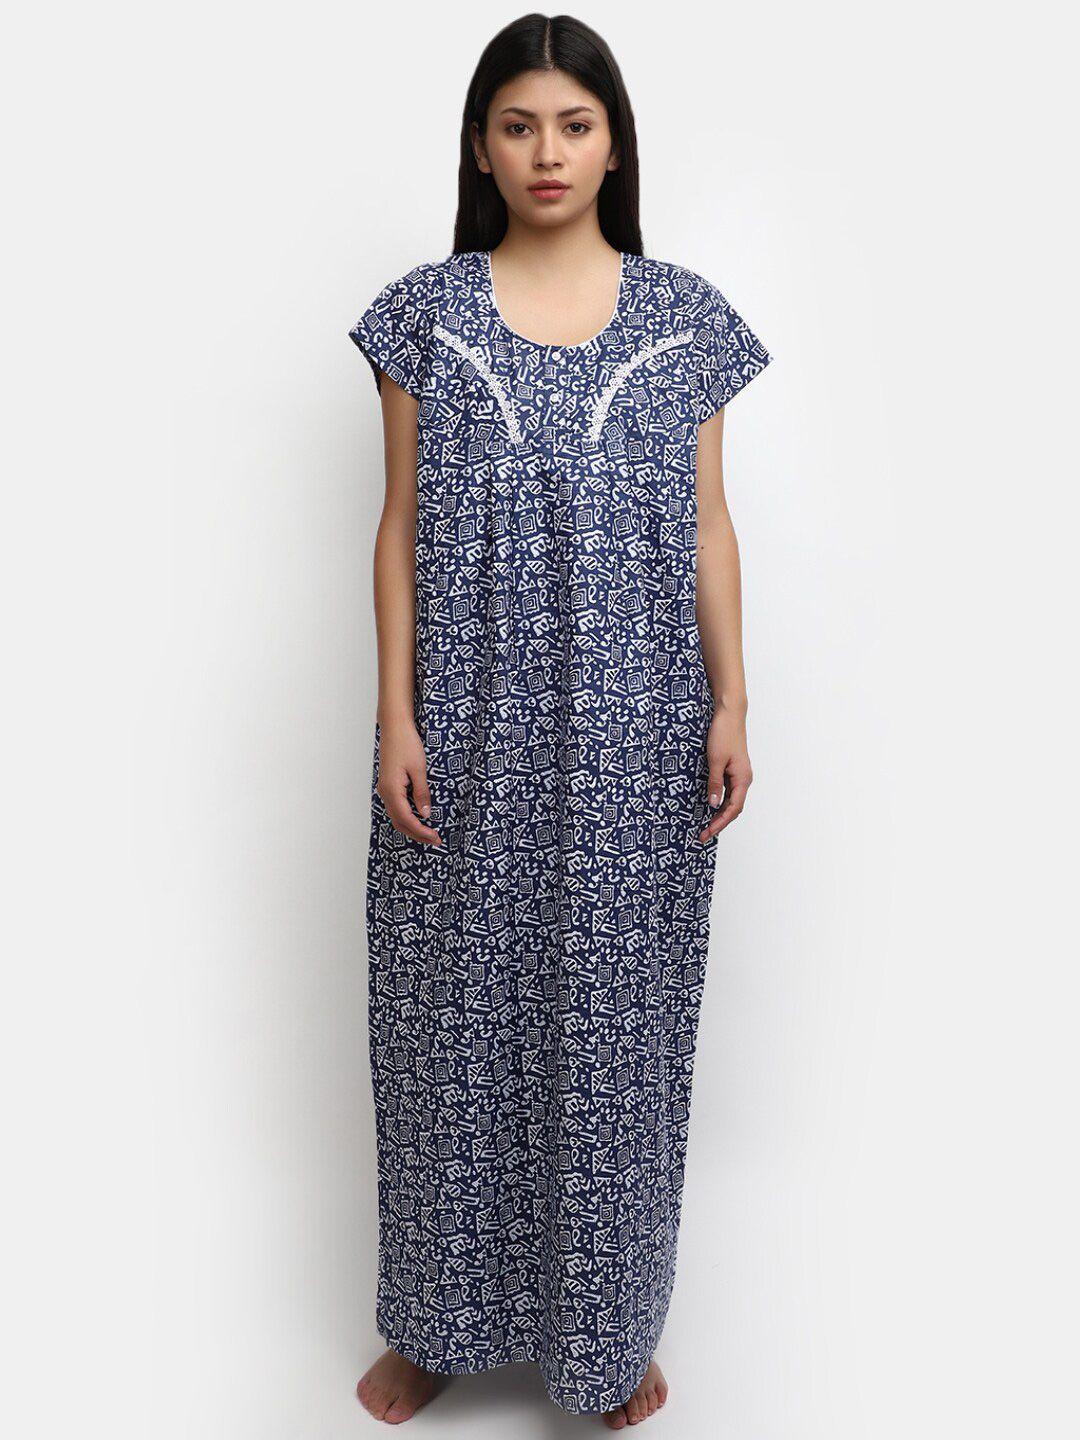 v-mart abstract printed pure cotton maxi nightdress